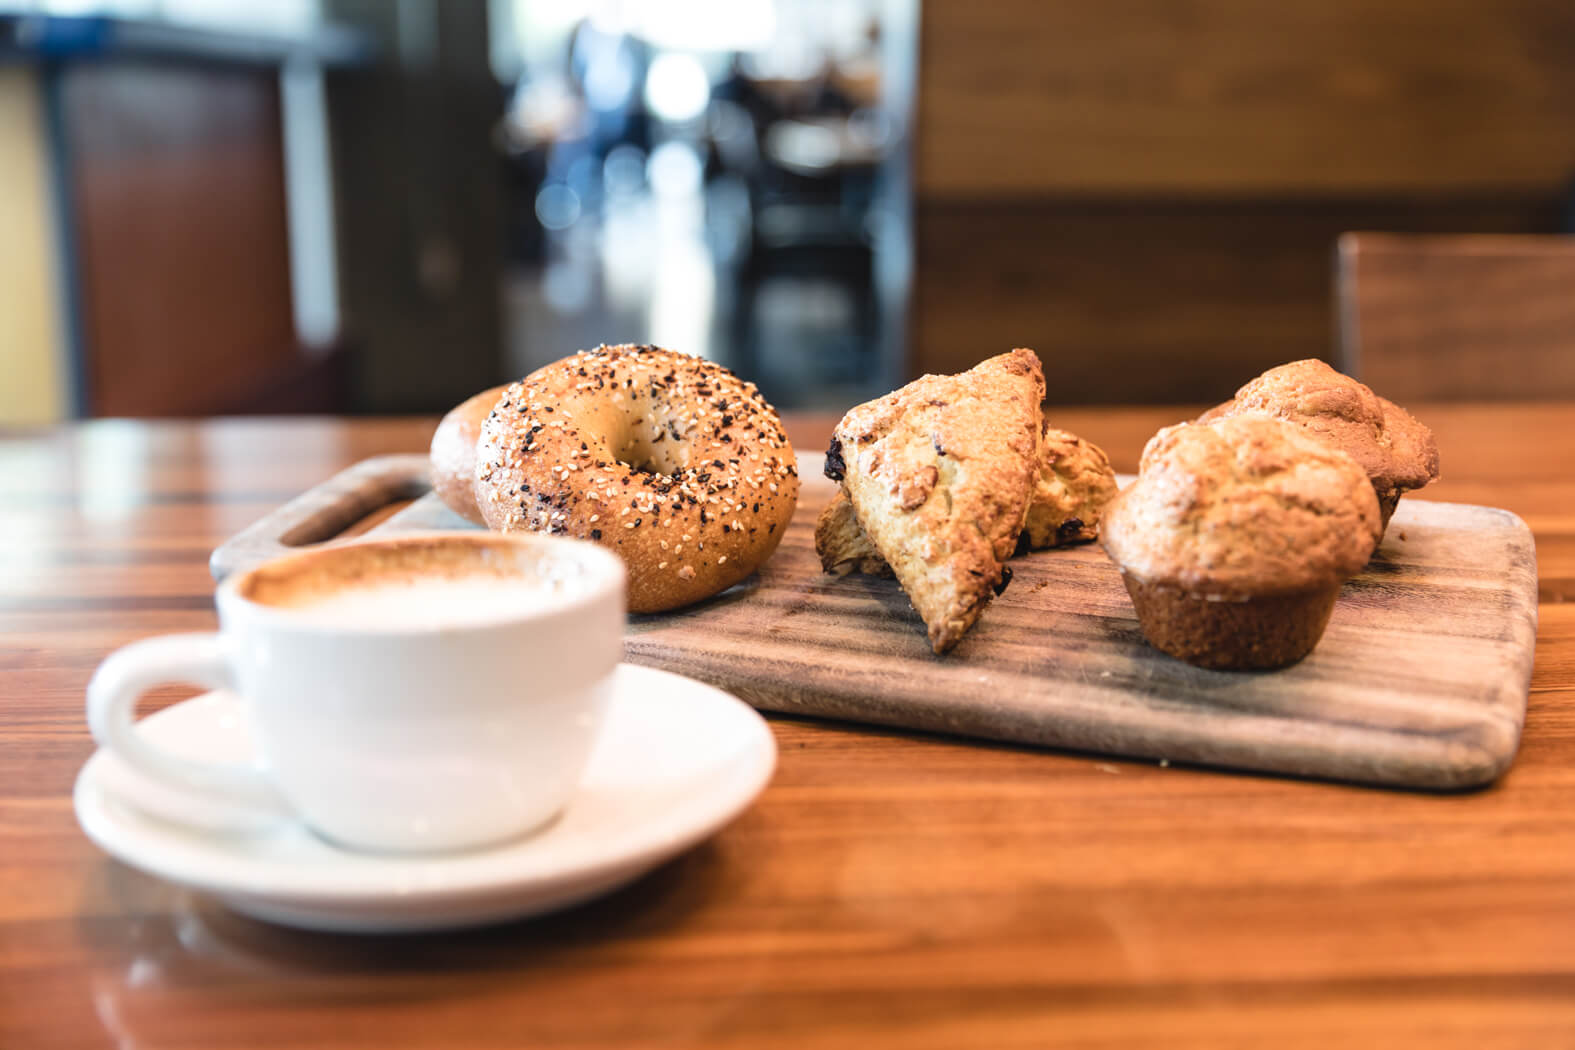 We serve bagels, scones, muffins and more